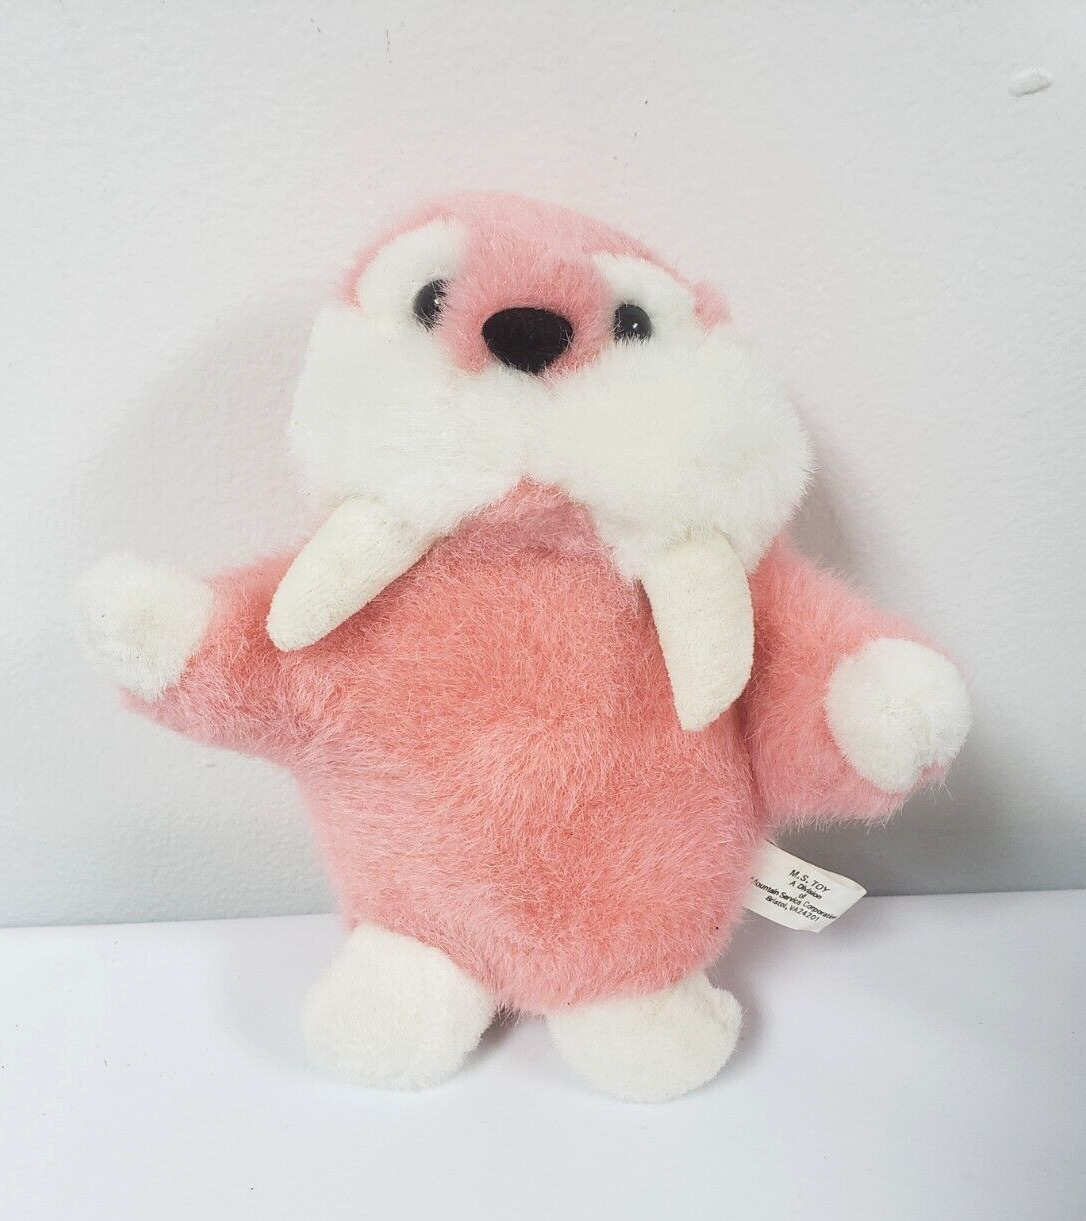 Vintage Pink Walrus Stuffed Animal Plush by M. S. toy 7 in